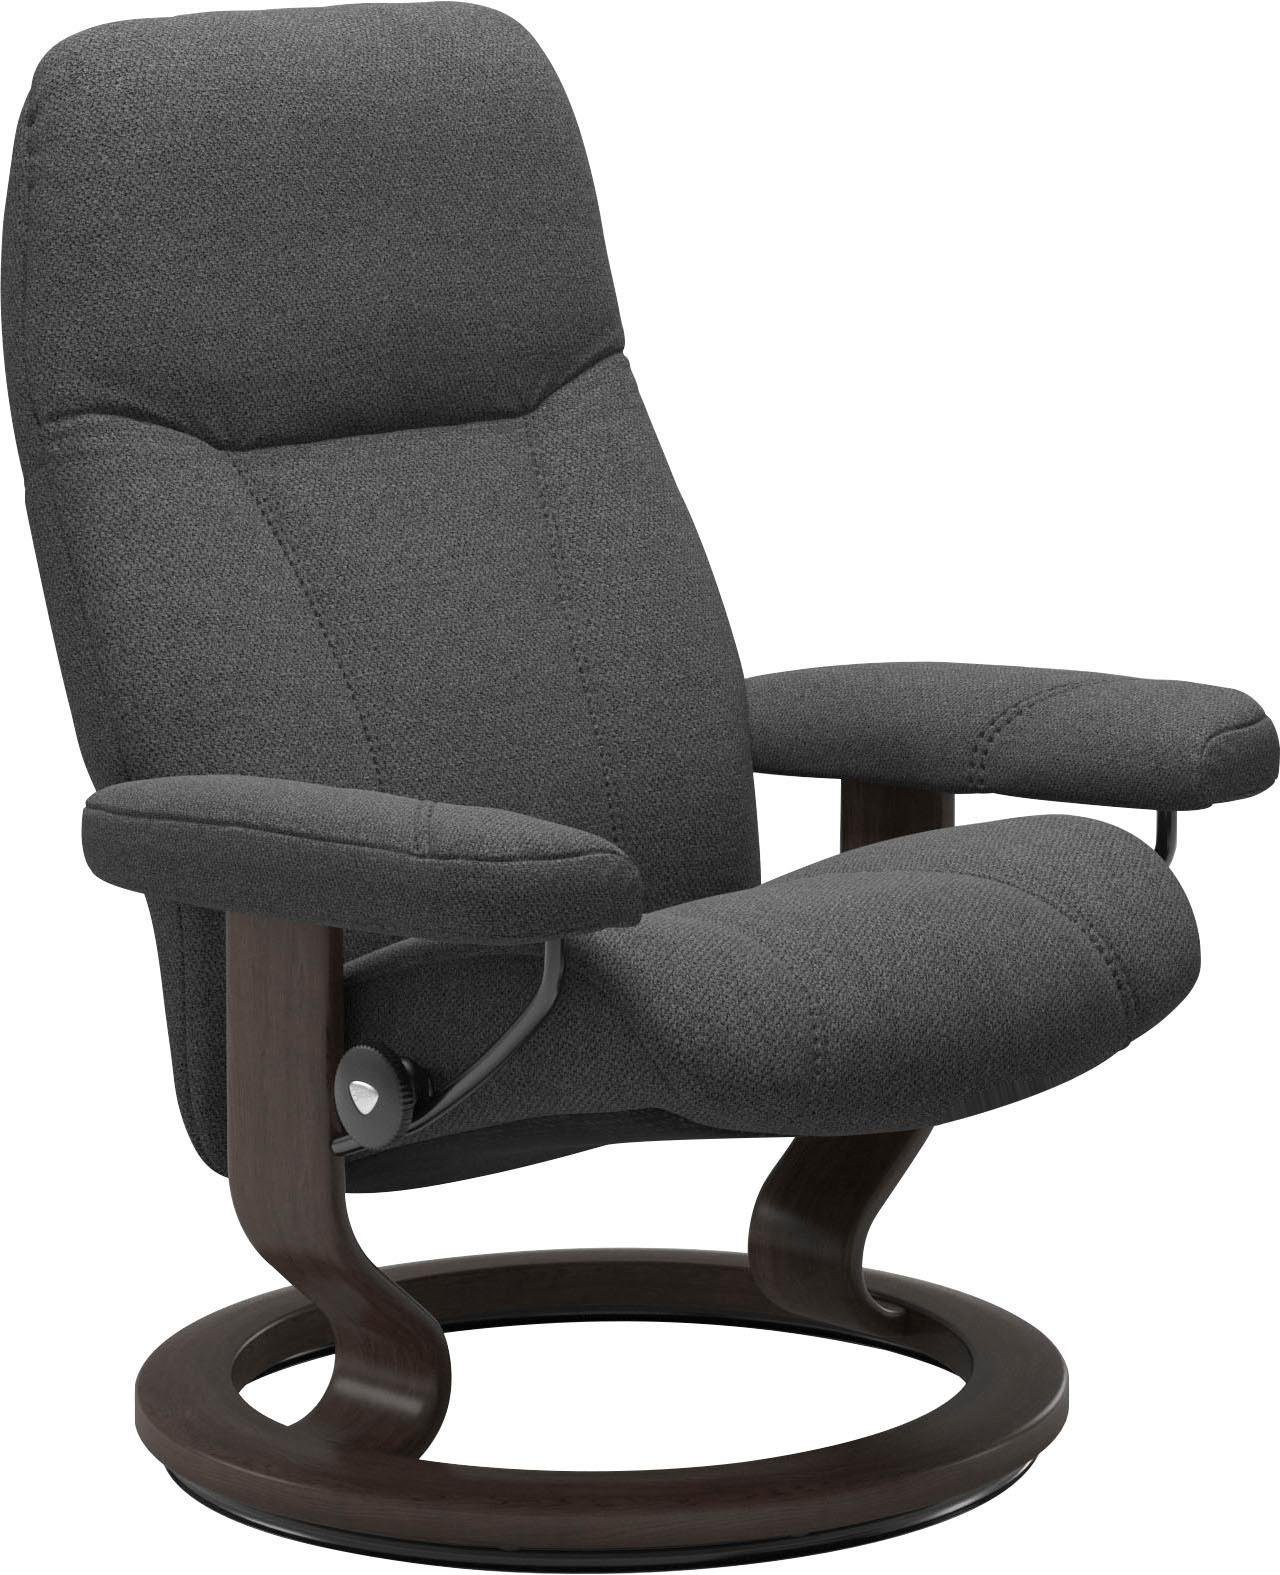 Base, Wenge Stressless® mit S, Relaxsessel Gestell Größe Consul, Classic